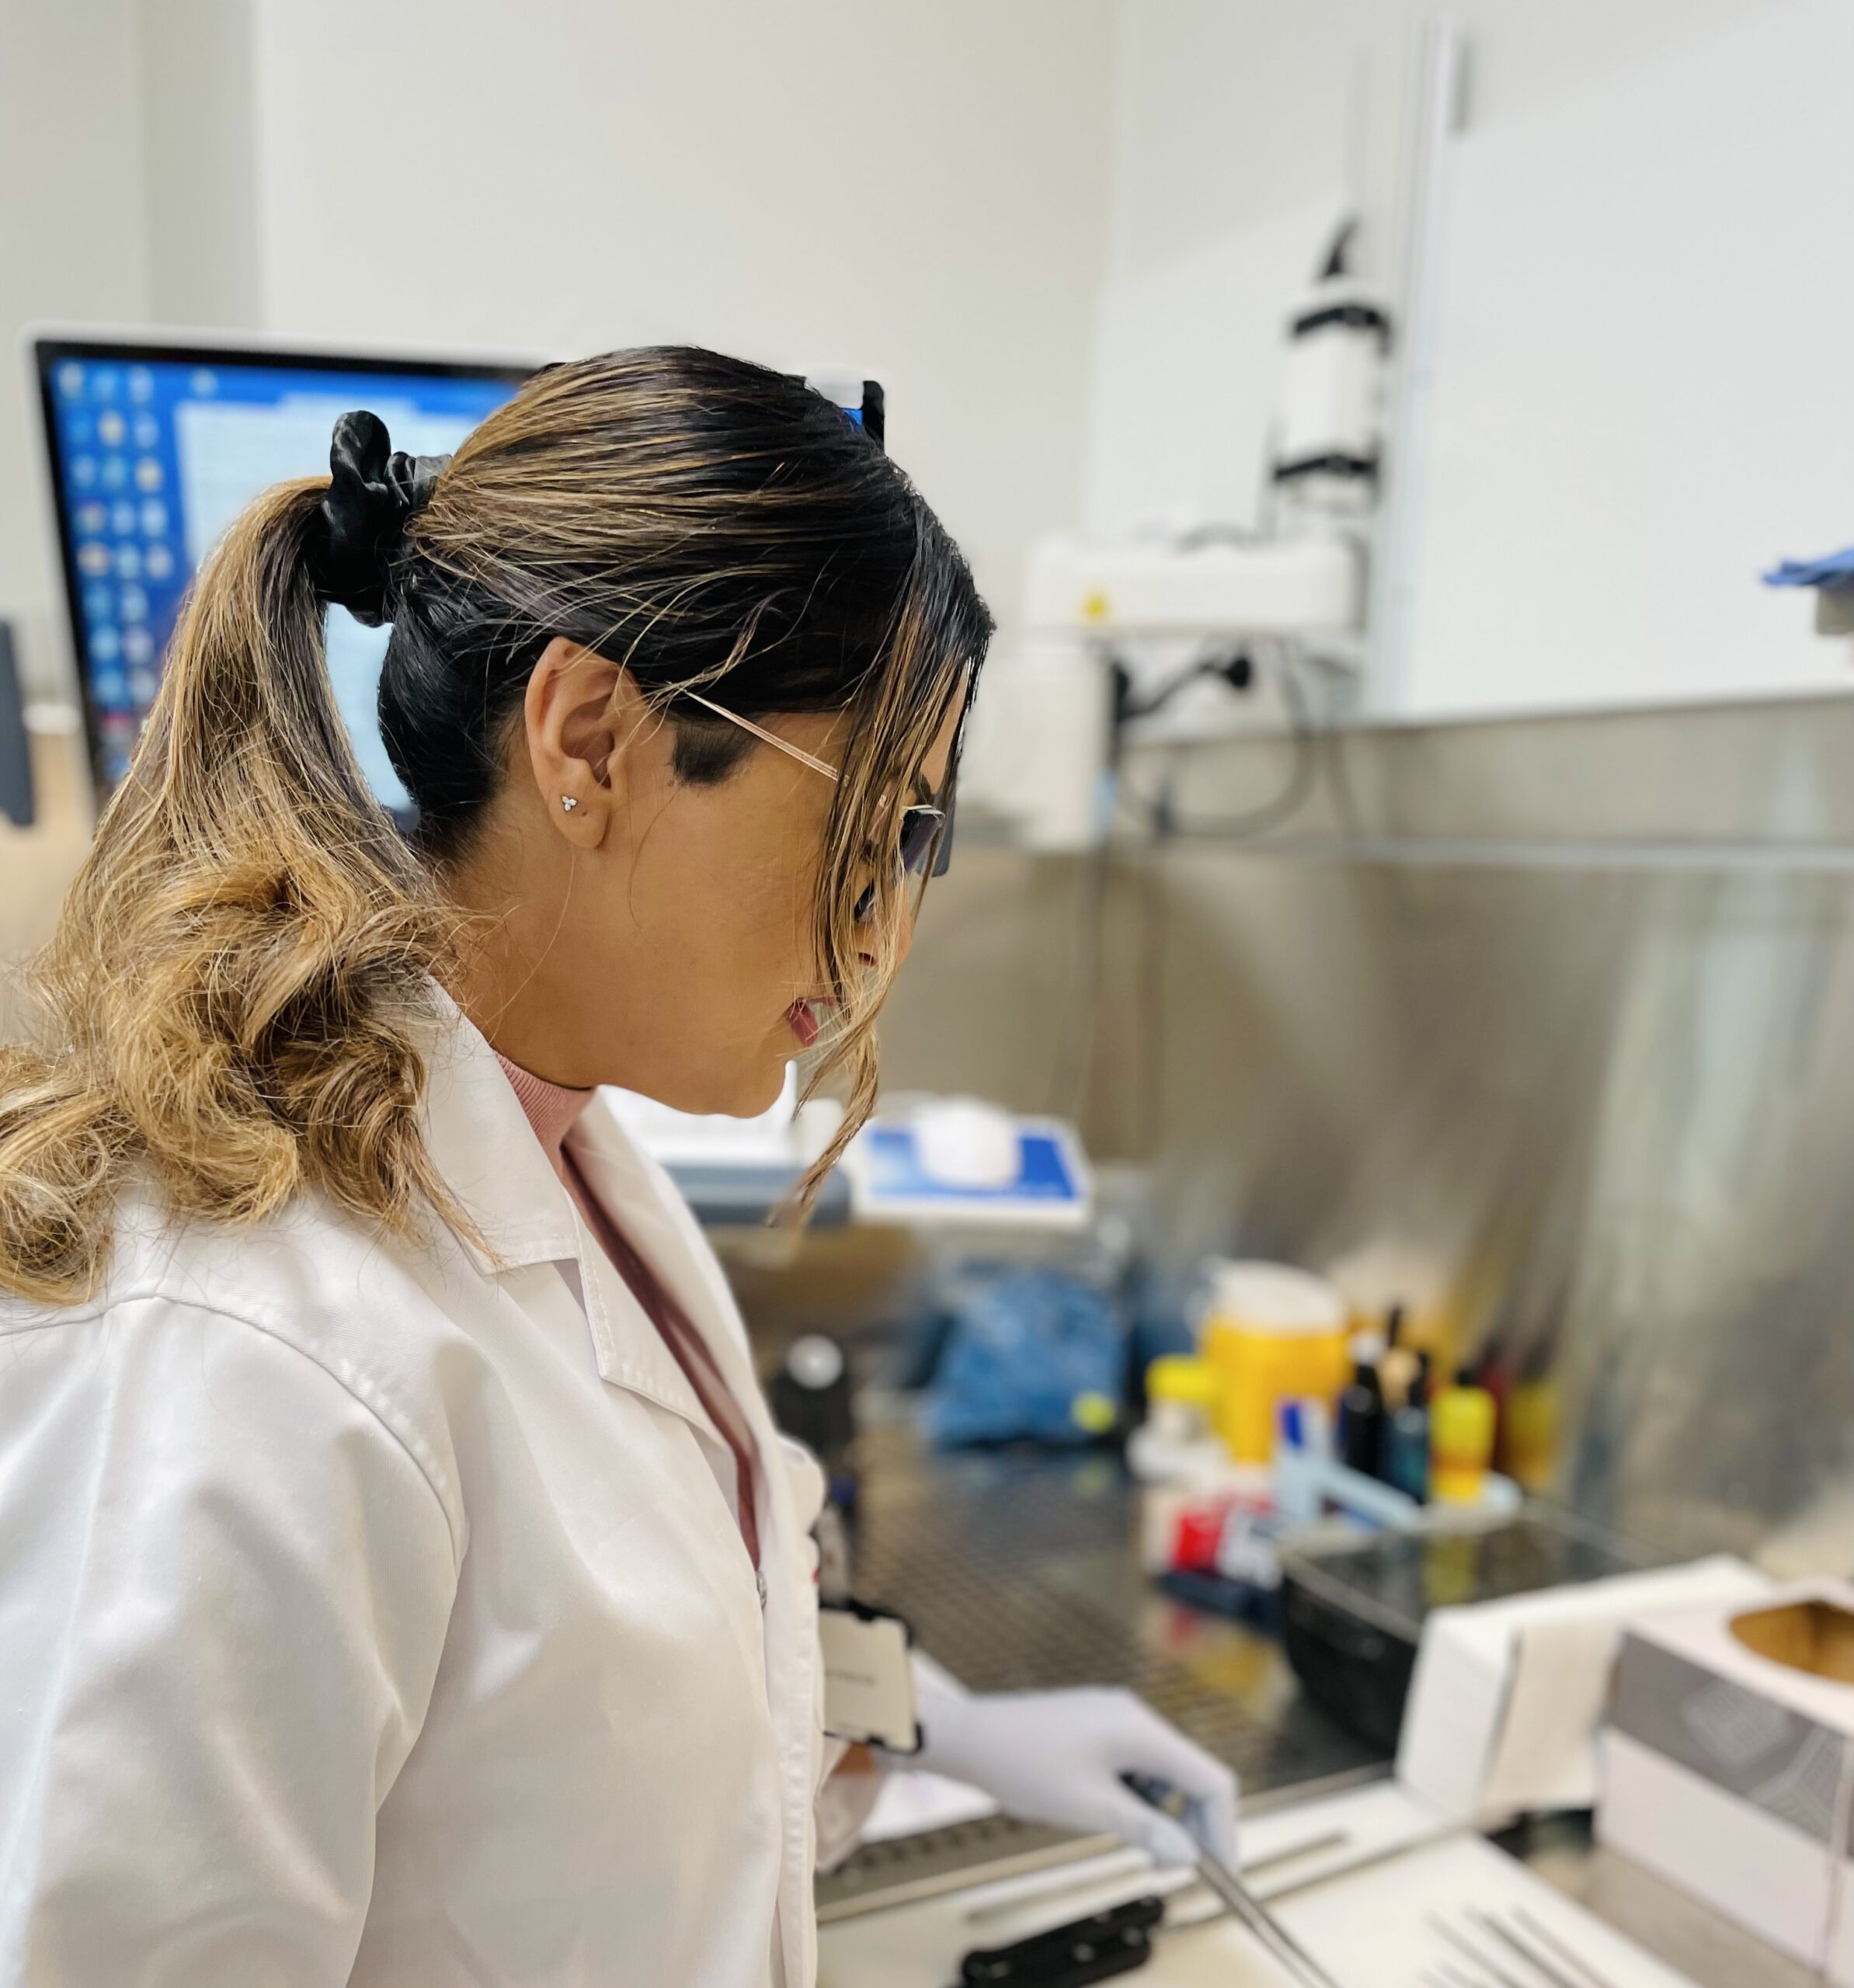 A woman works at a laboratory bench wearing a white lab coat.